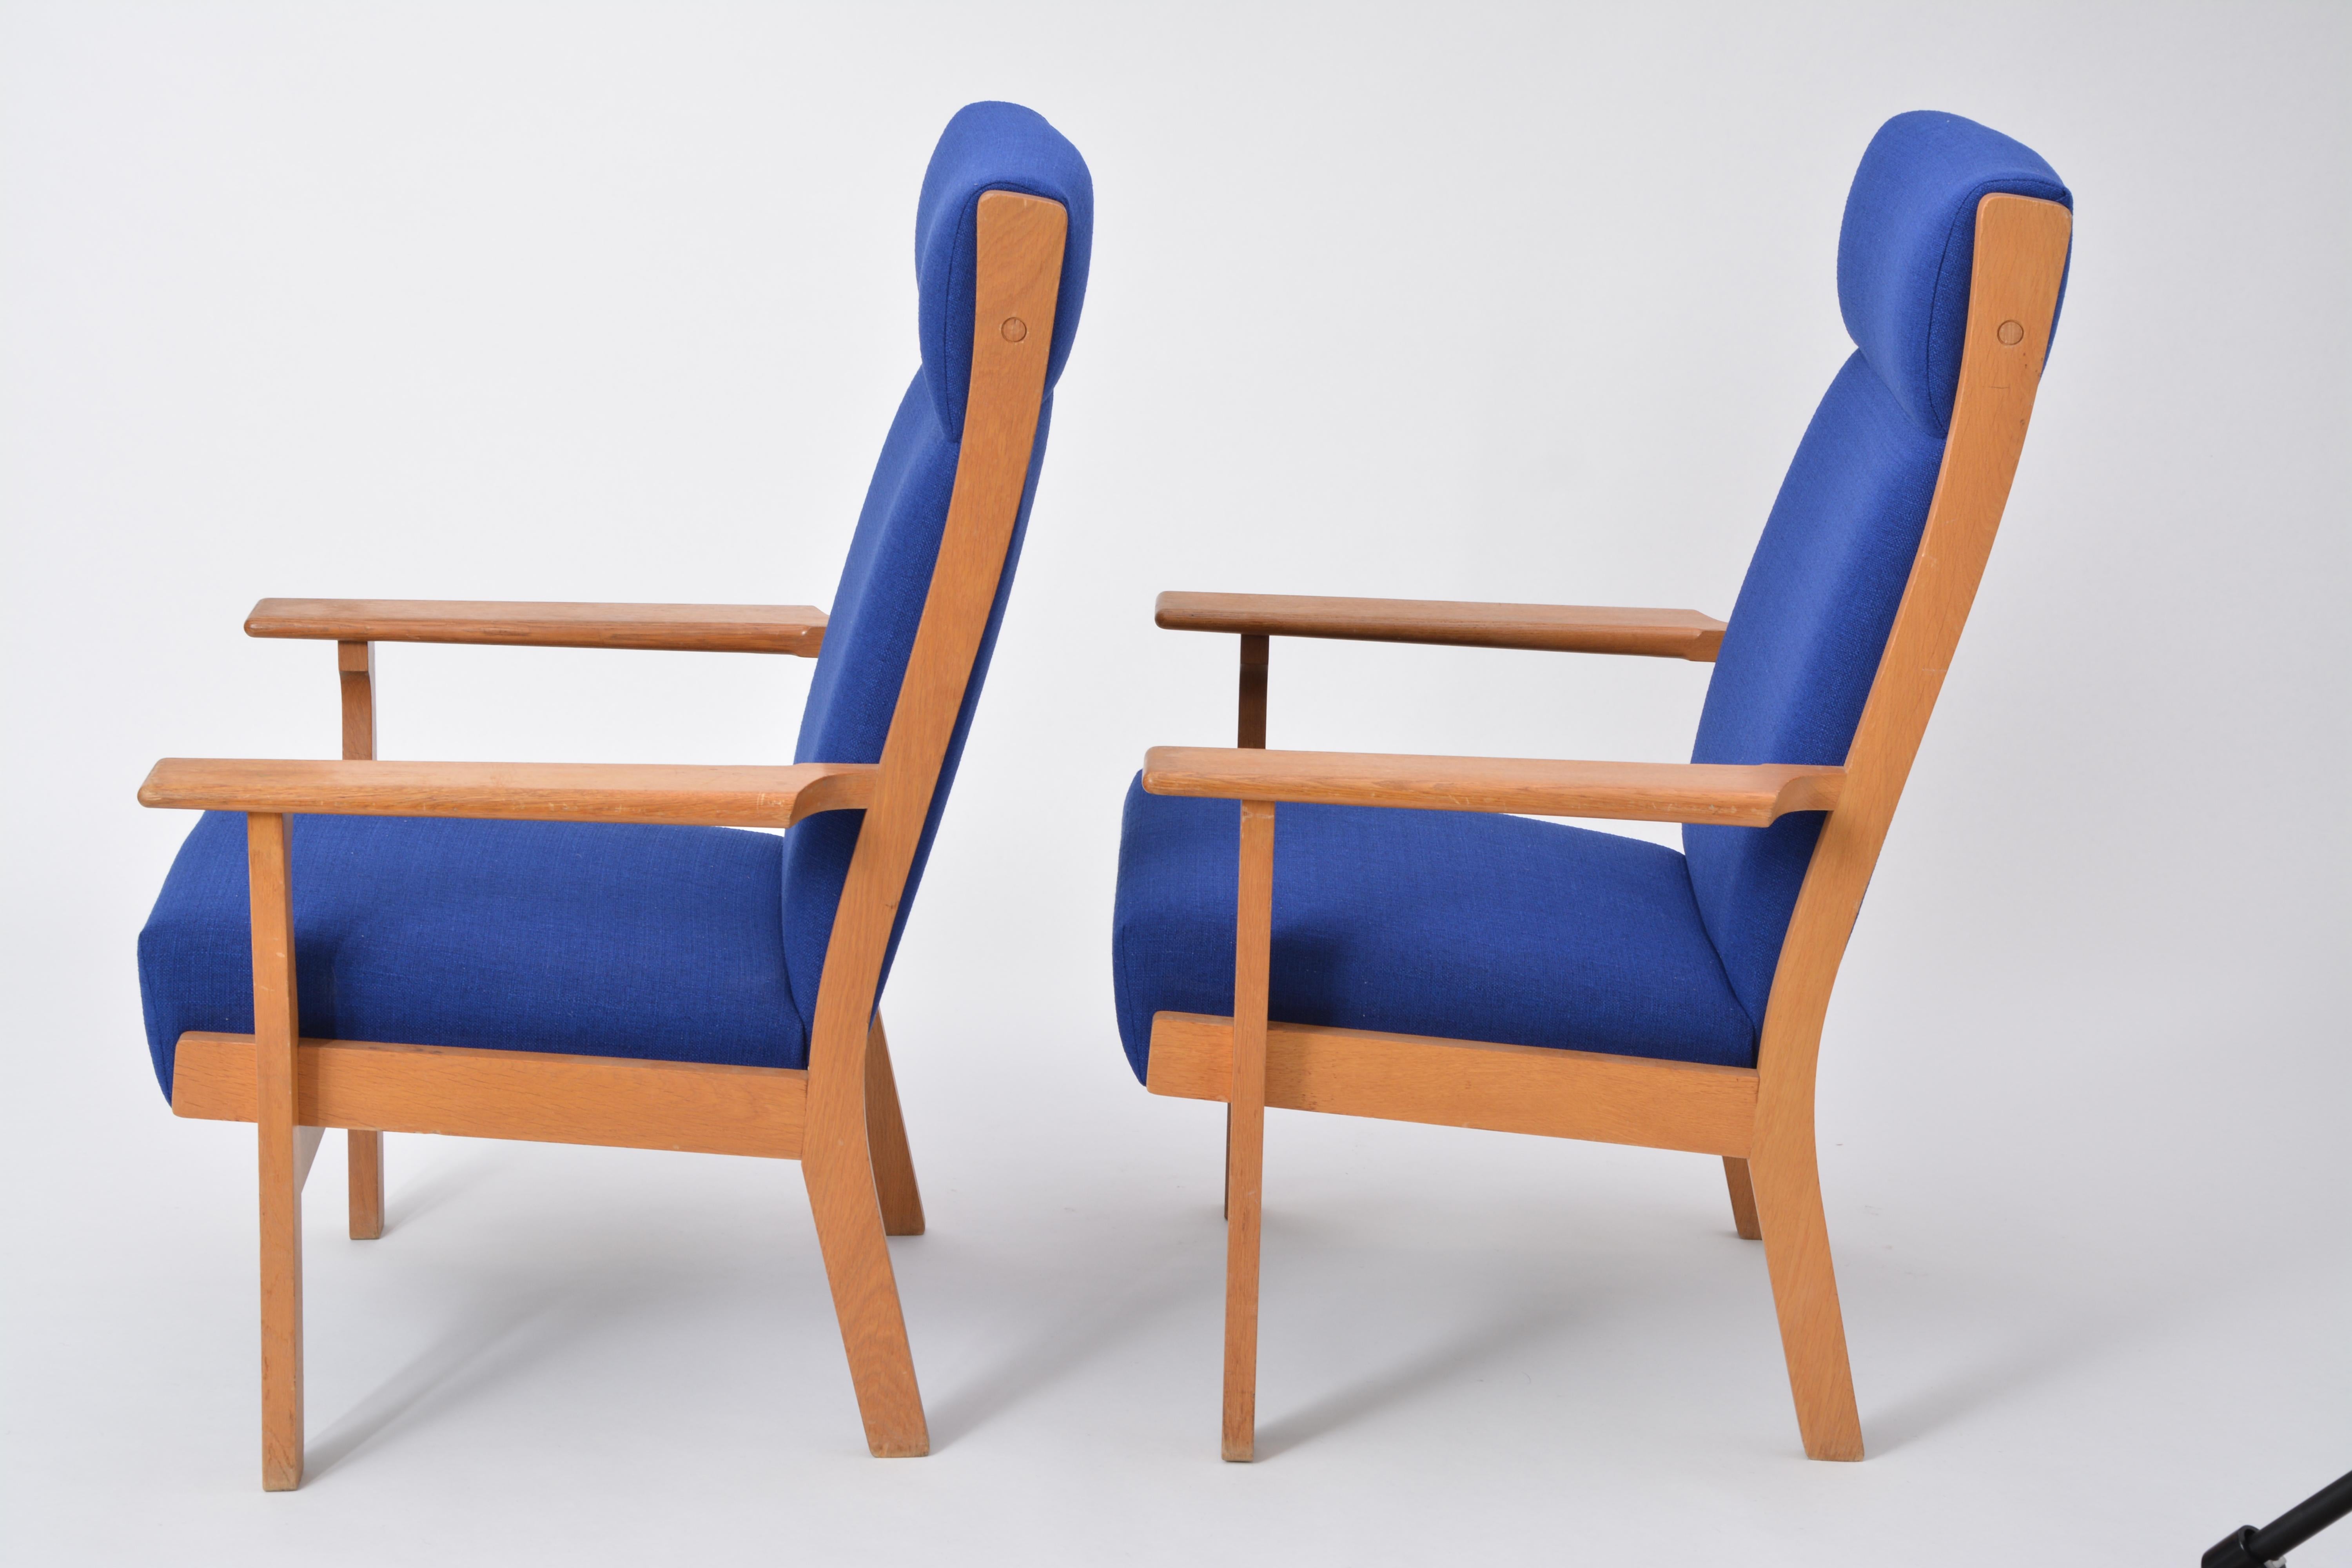 Set of Two Danish Mid-Century Modern GE 181 a Chairs by Hans Wegner for GETAMA For Sale 3